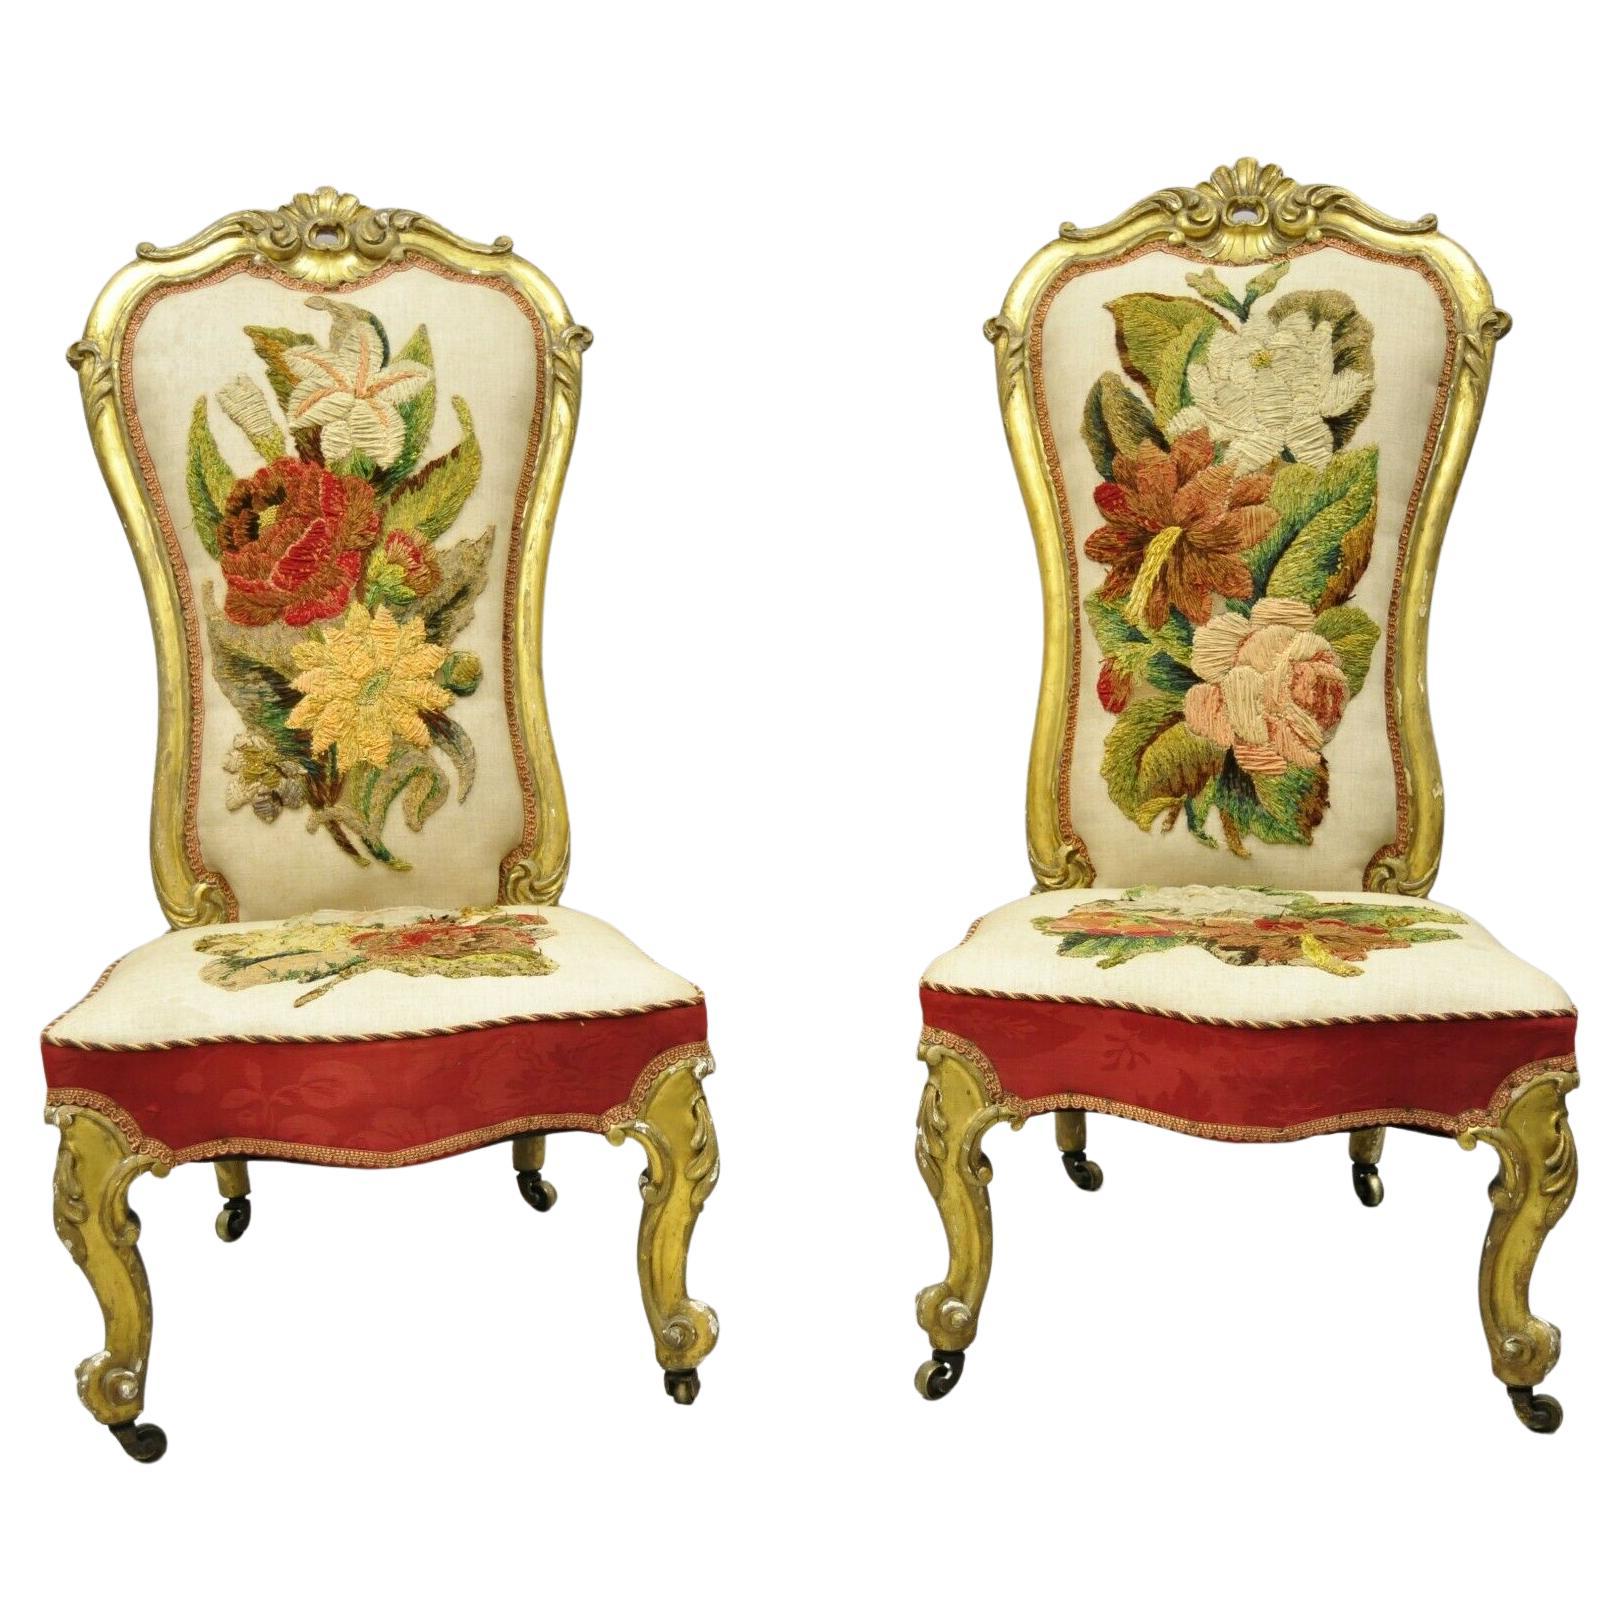 Antique French Victorian Gold Gilt Rococo Revival Slipper Parlor Chairs, a Pair For Sale